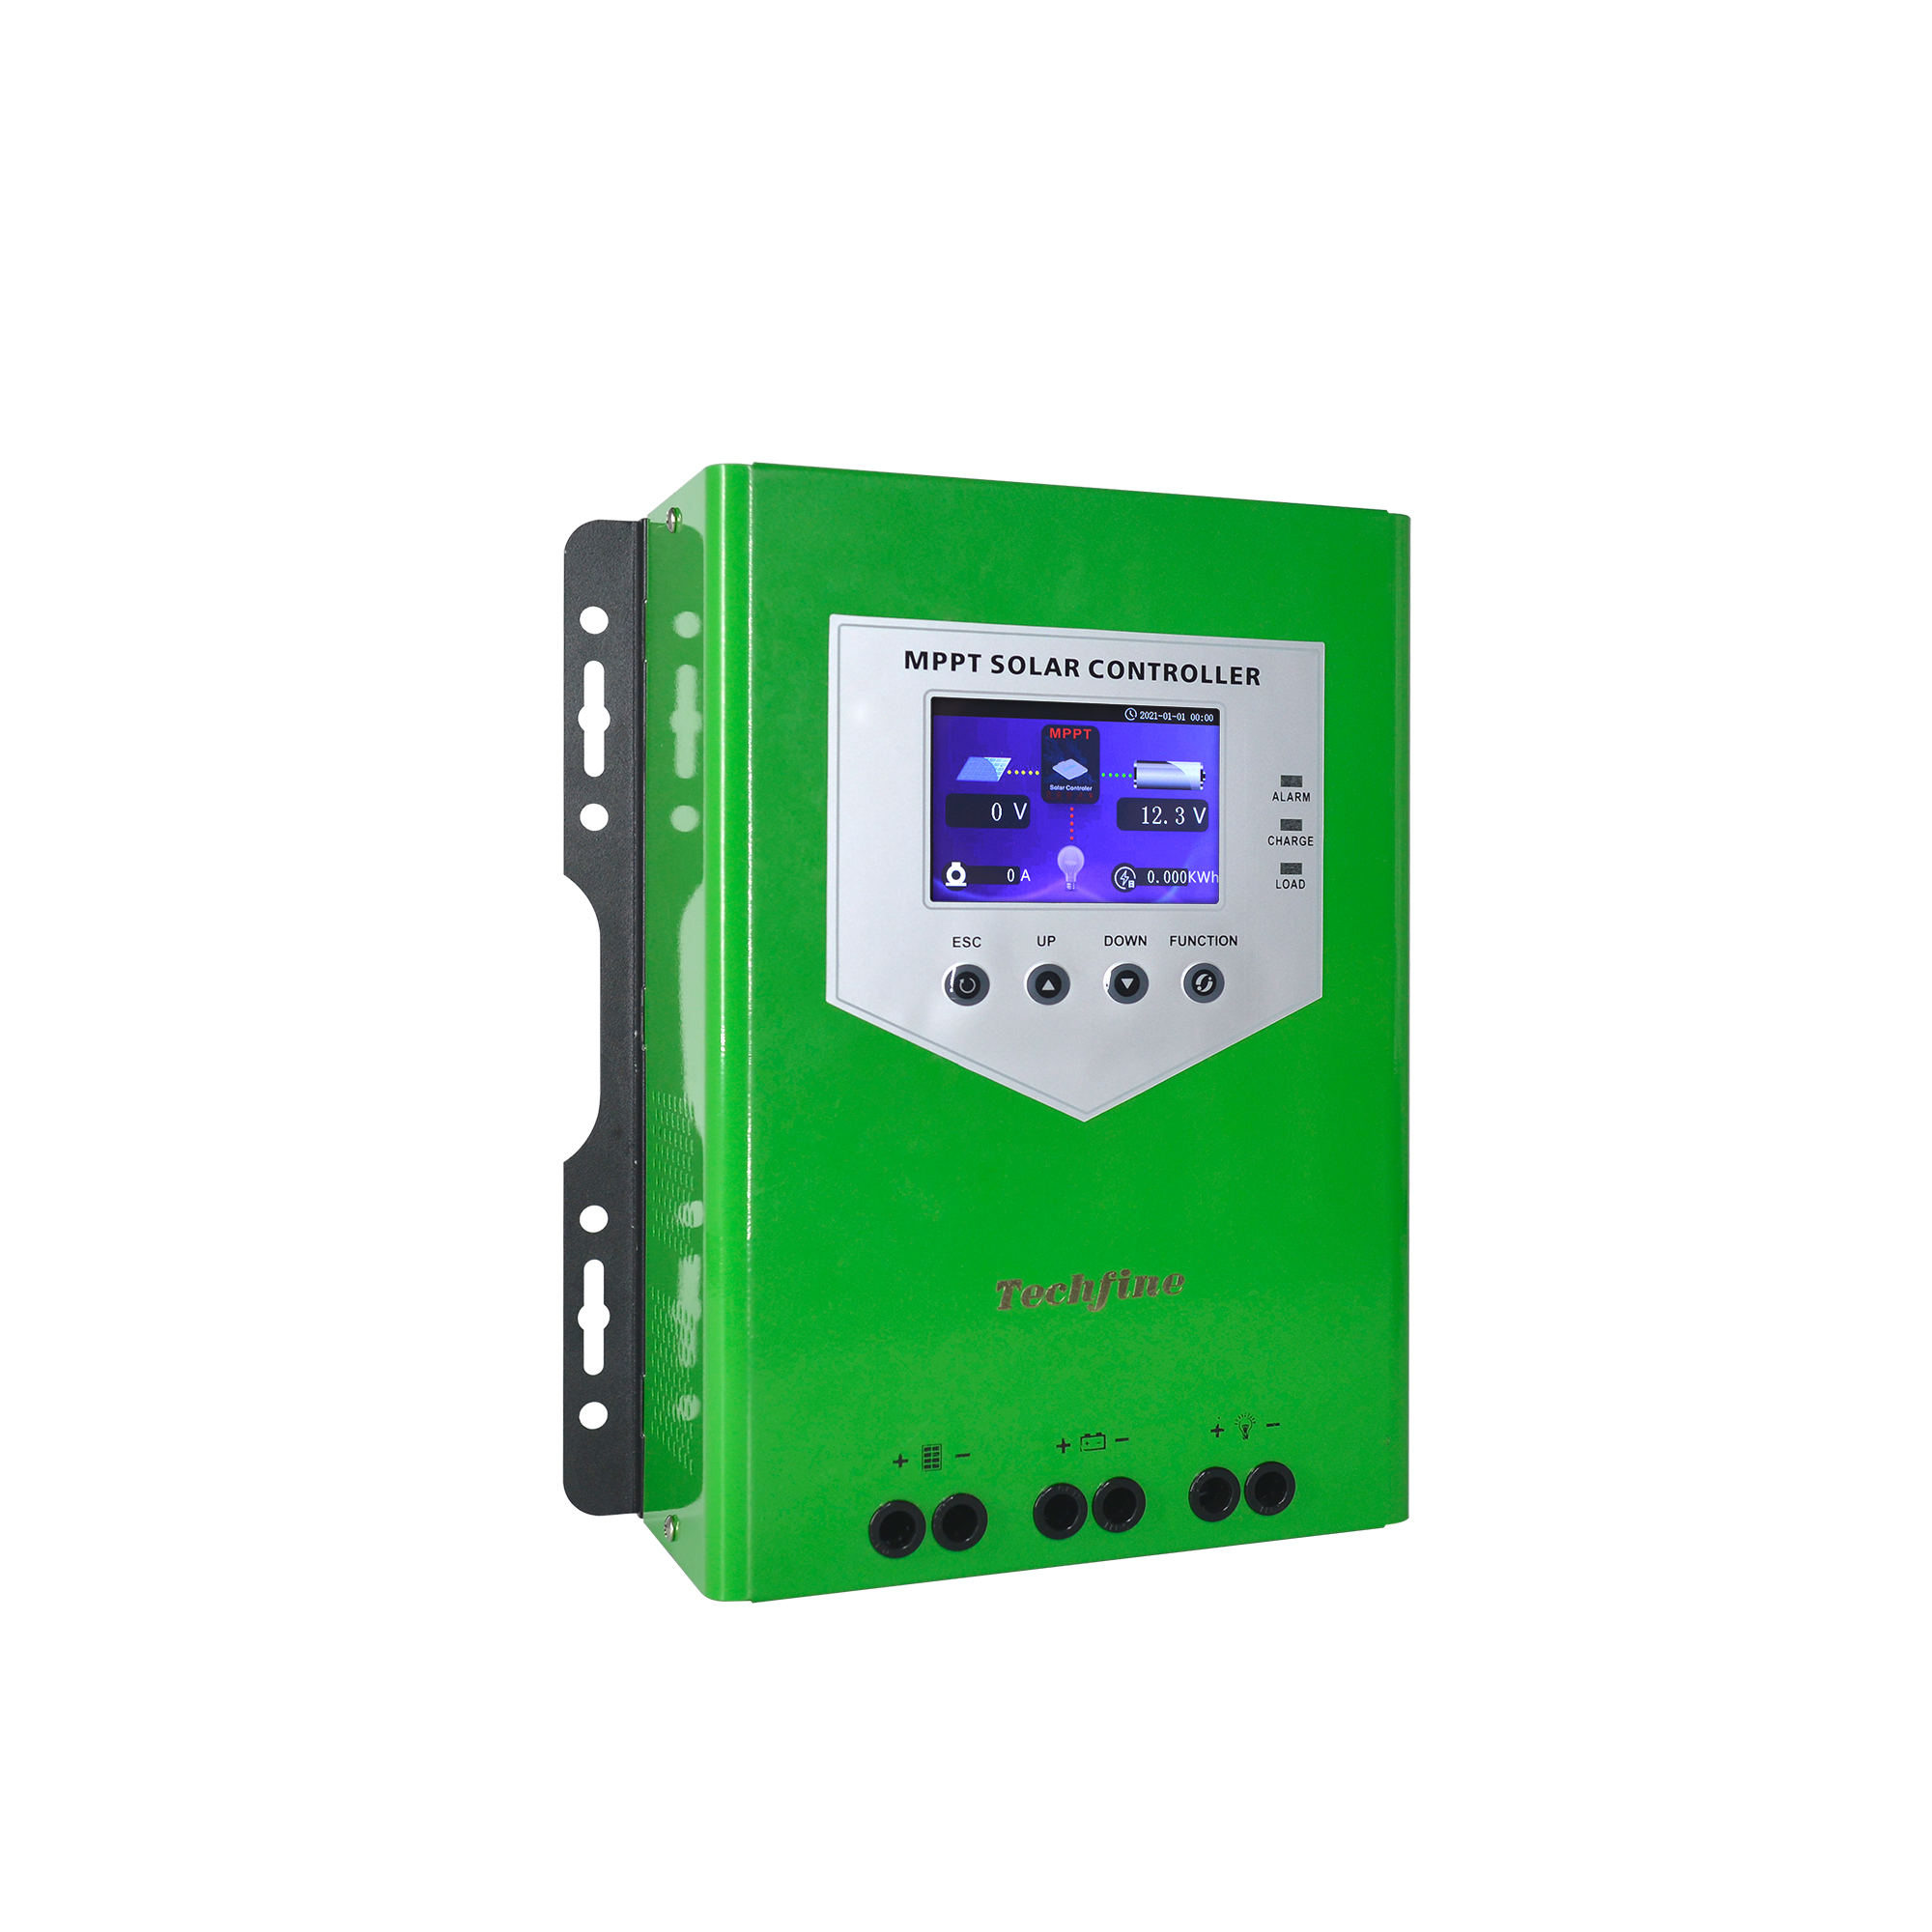 Techfine 80A Solar Charge Controller 96V 8320W PV For Solar System